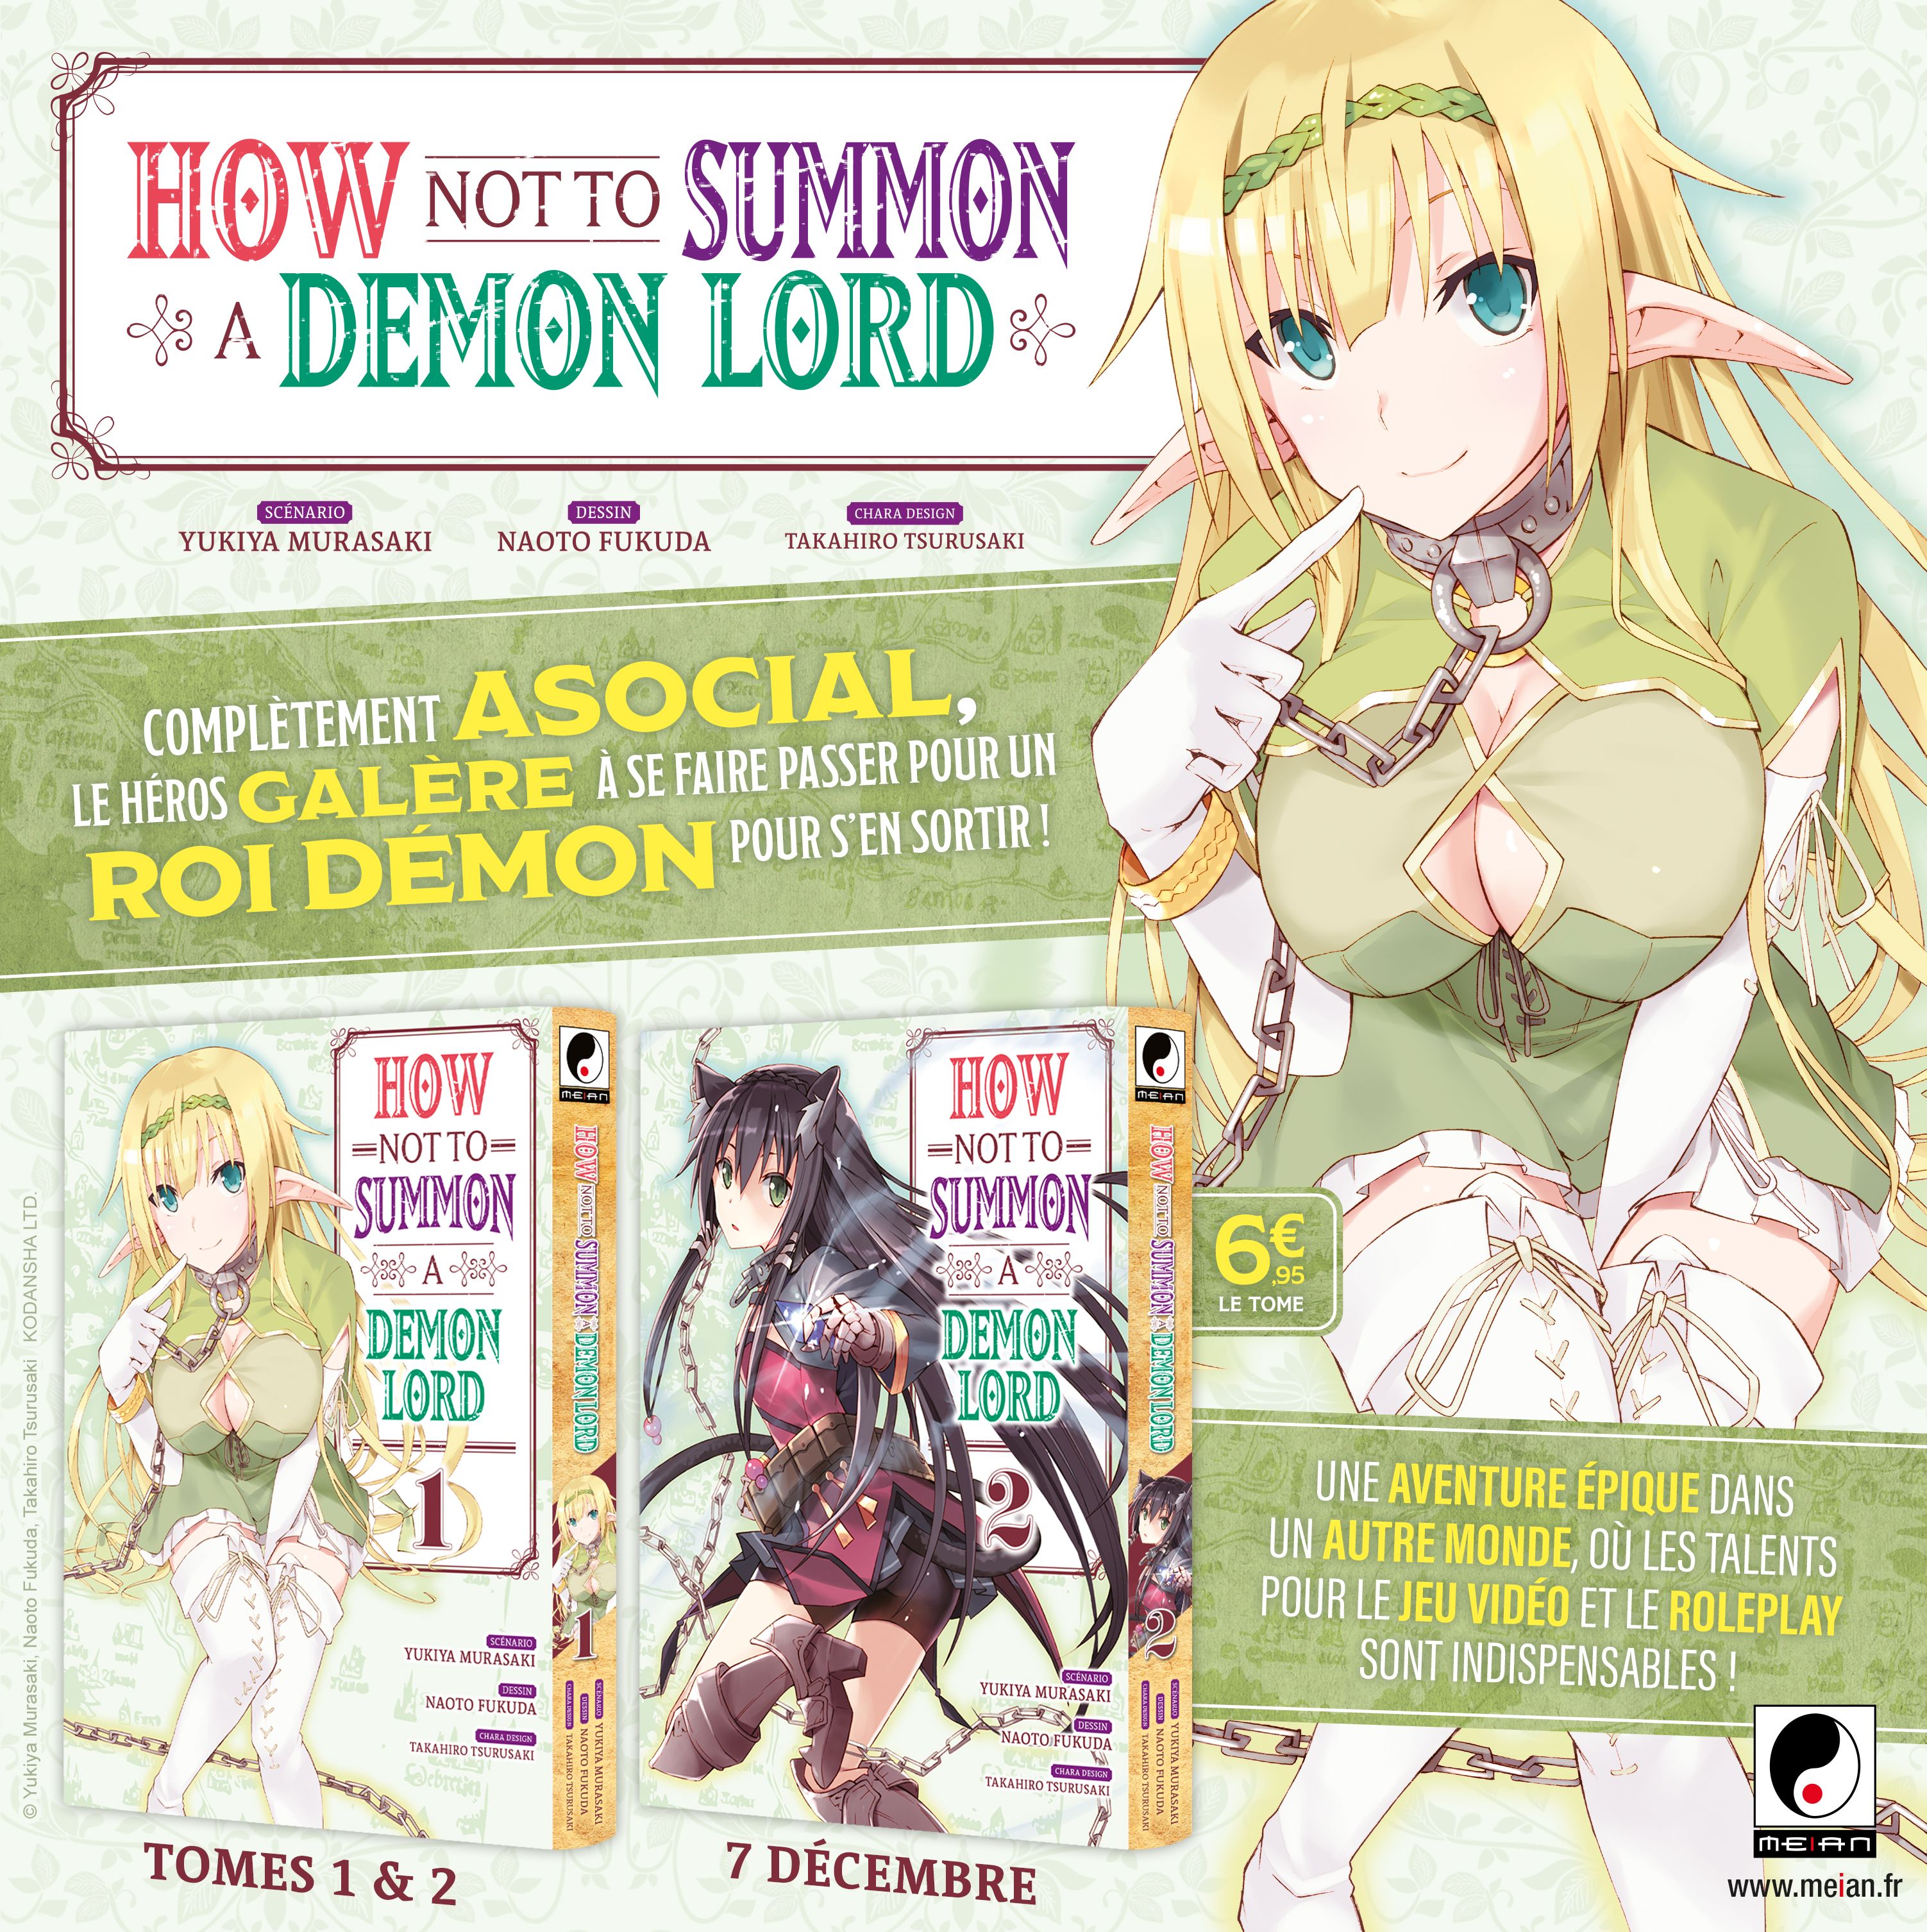 https://www.manga-news.com/public/2022/news_10/How_not_to_summon_a_demon_lord_annonce_meian.jpg